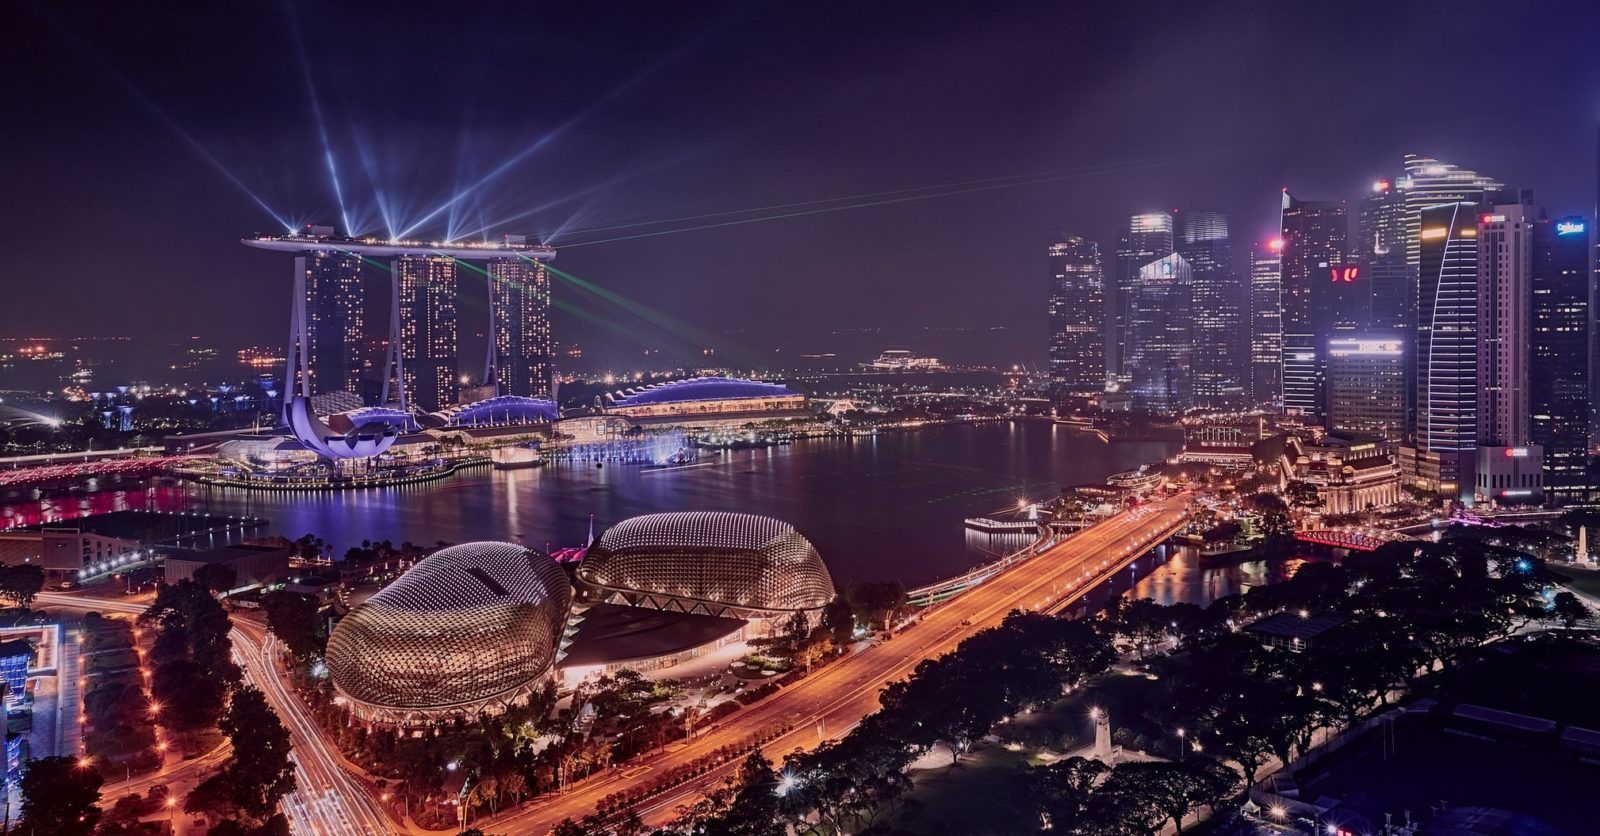 7 ways to celebrate New Year’s Eve in Singapore, from light shows to cruises